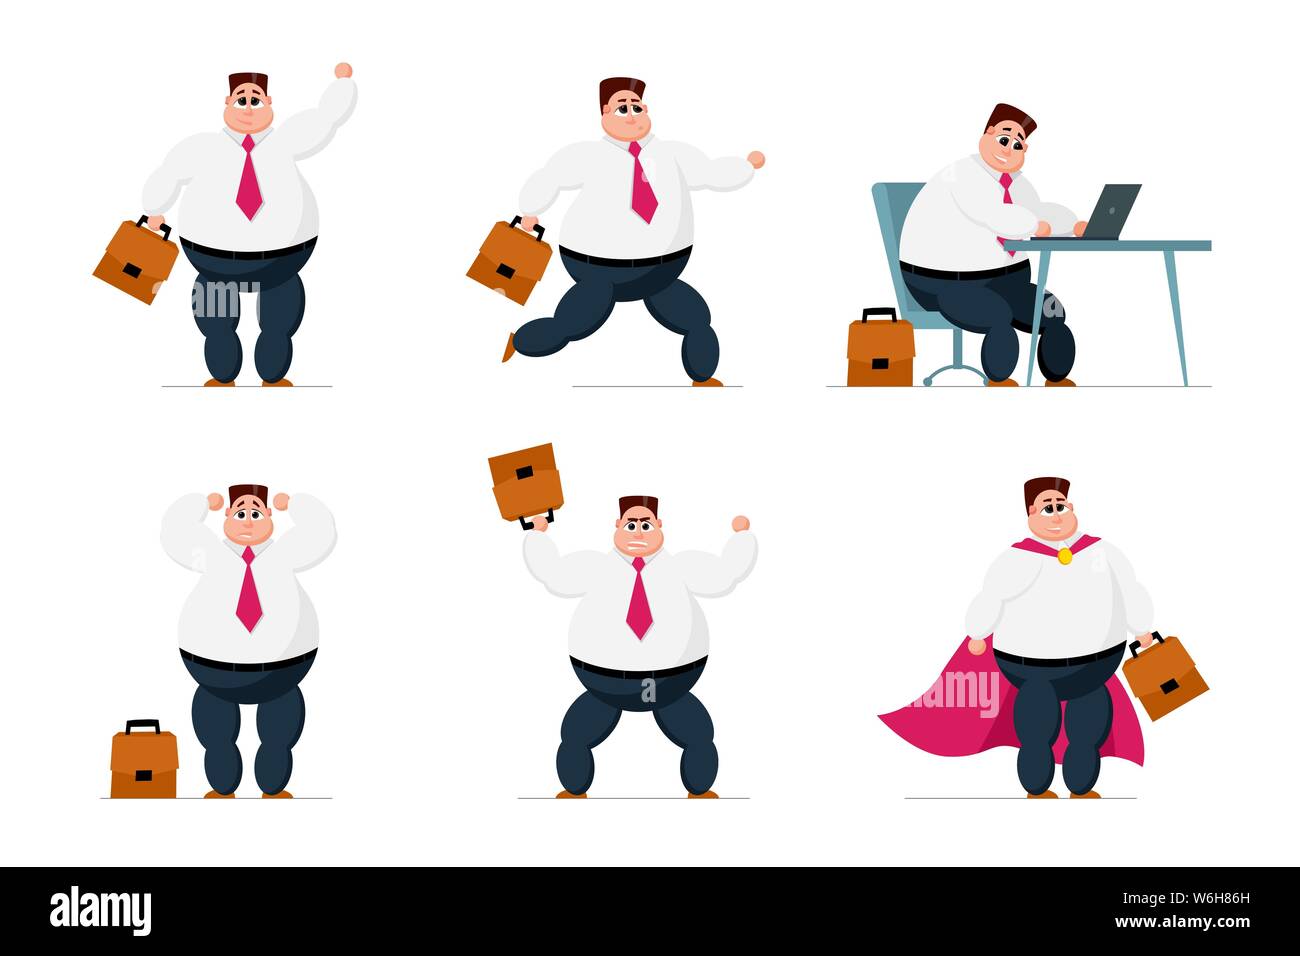 Businessman collection. Office fat worker business men in different situations set. Manager cartoon character job actions and emotions vector illustration Stock Vector